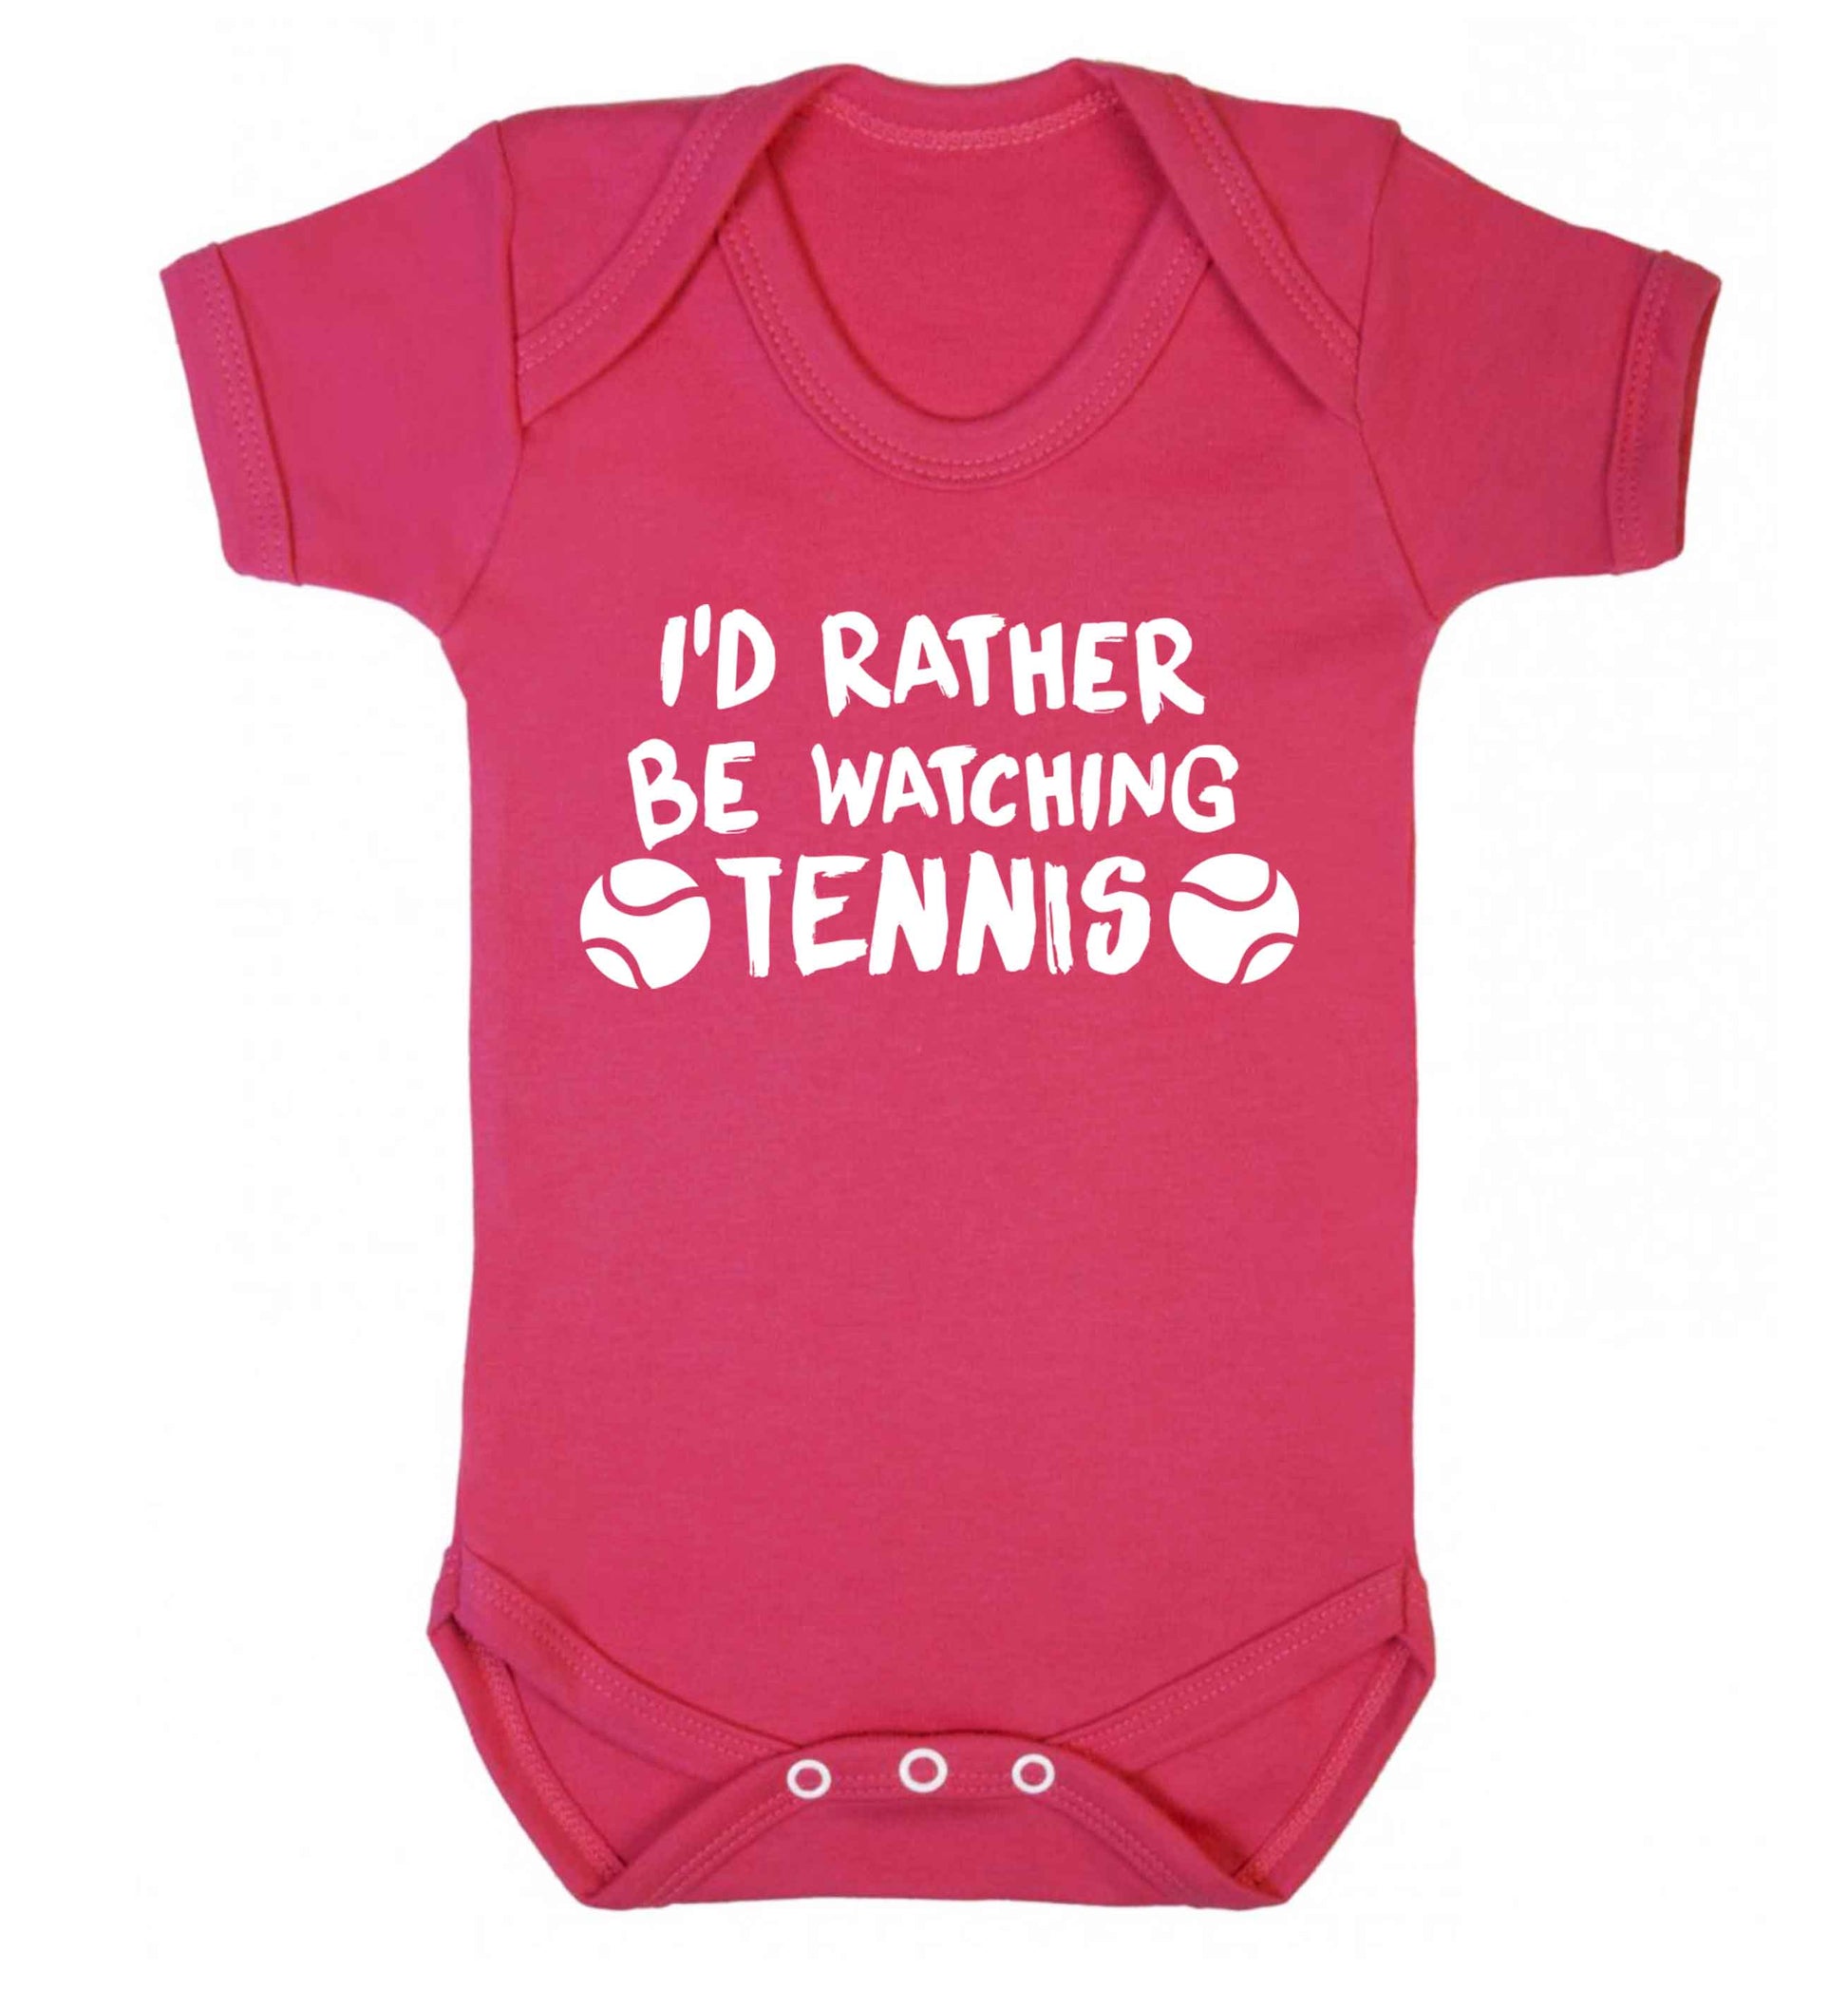 I'd rather be watching the tennis Baby Vest dark pink 18-24 months